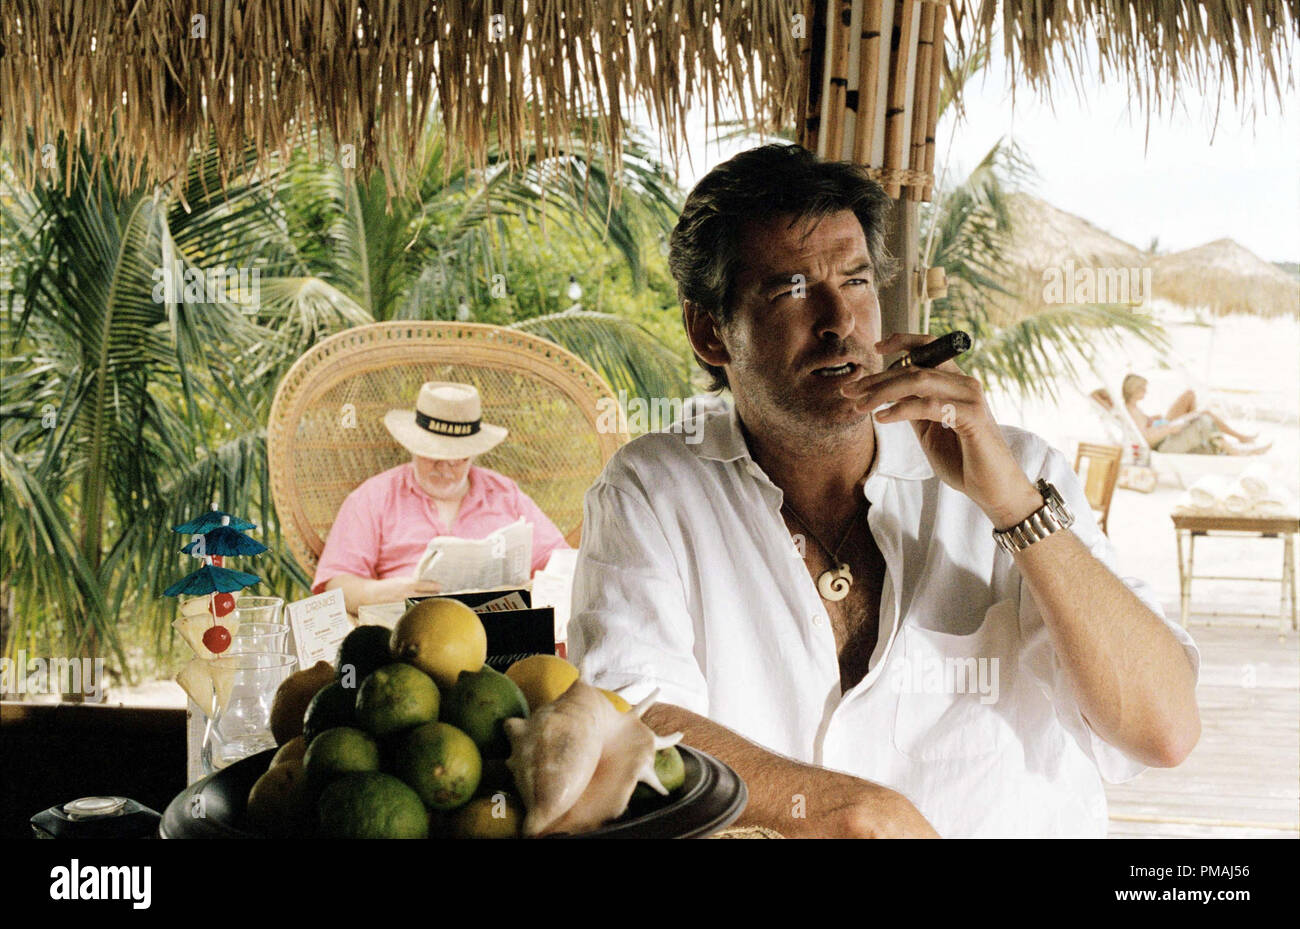 Pierce Brosnan as 'Max' adjusts quickly to his new life in the Bahamas in New Line Cinema's film After The Sunset. (2004) Stock Photo